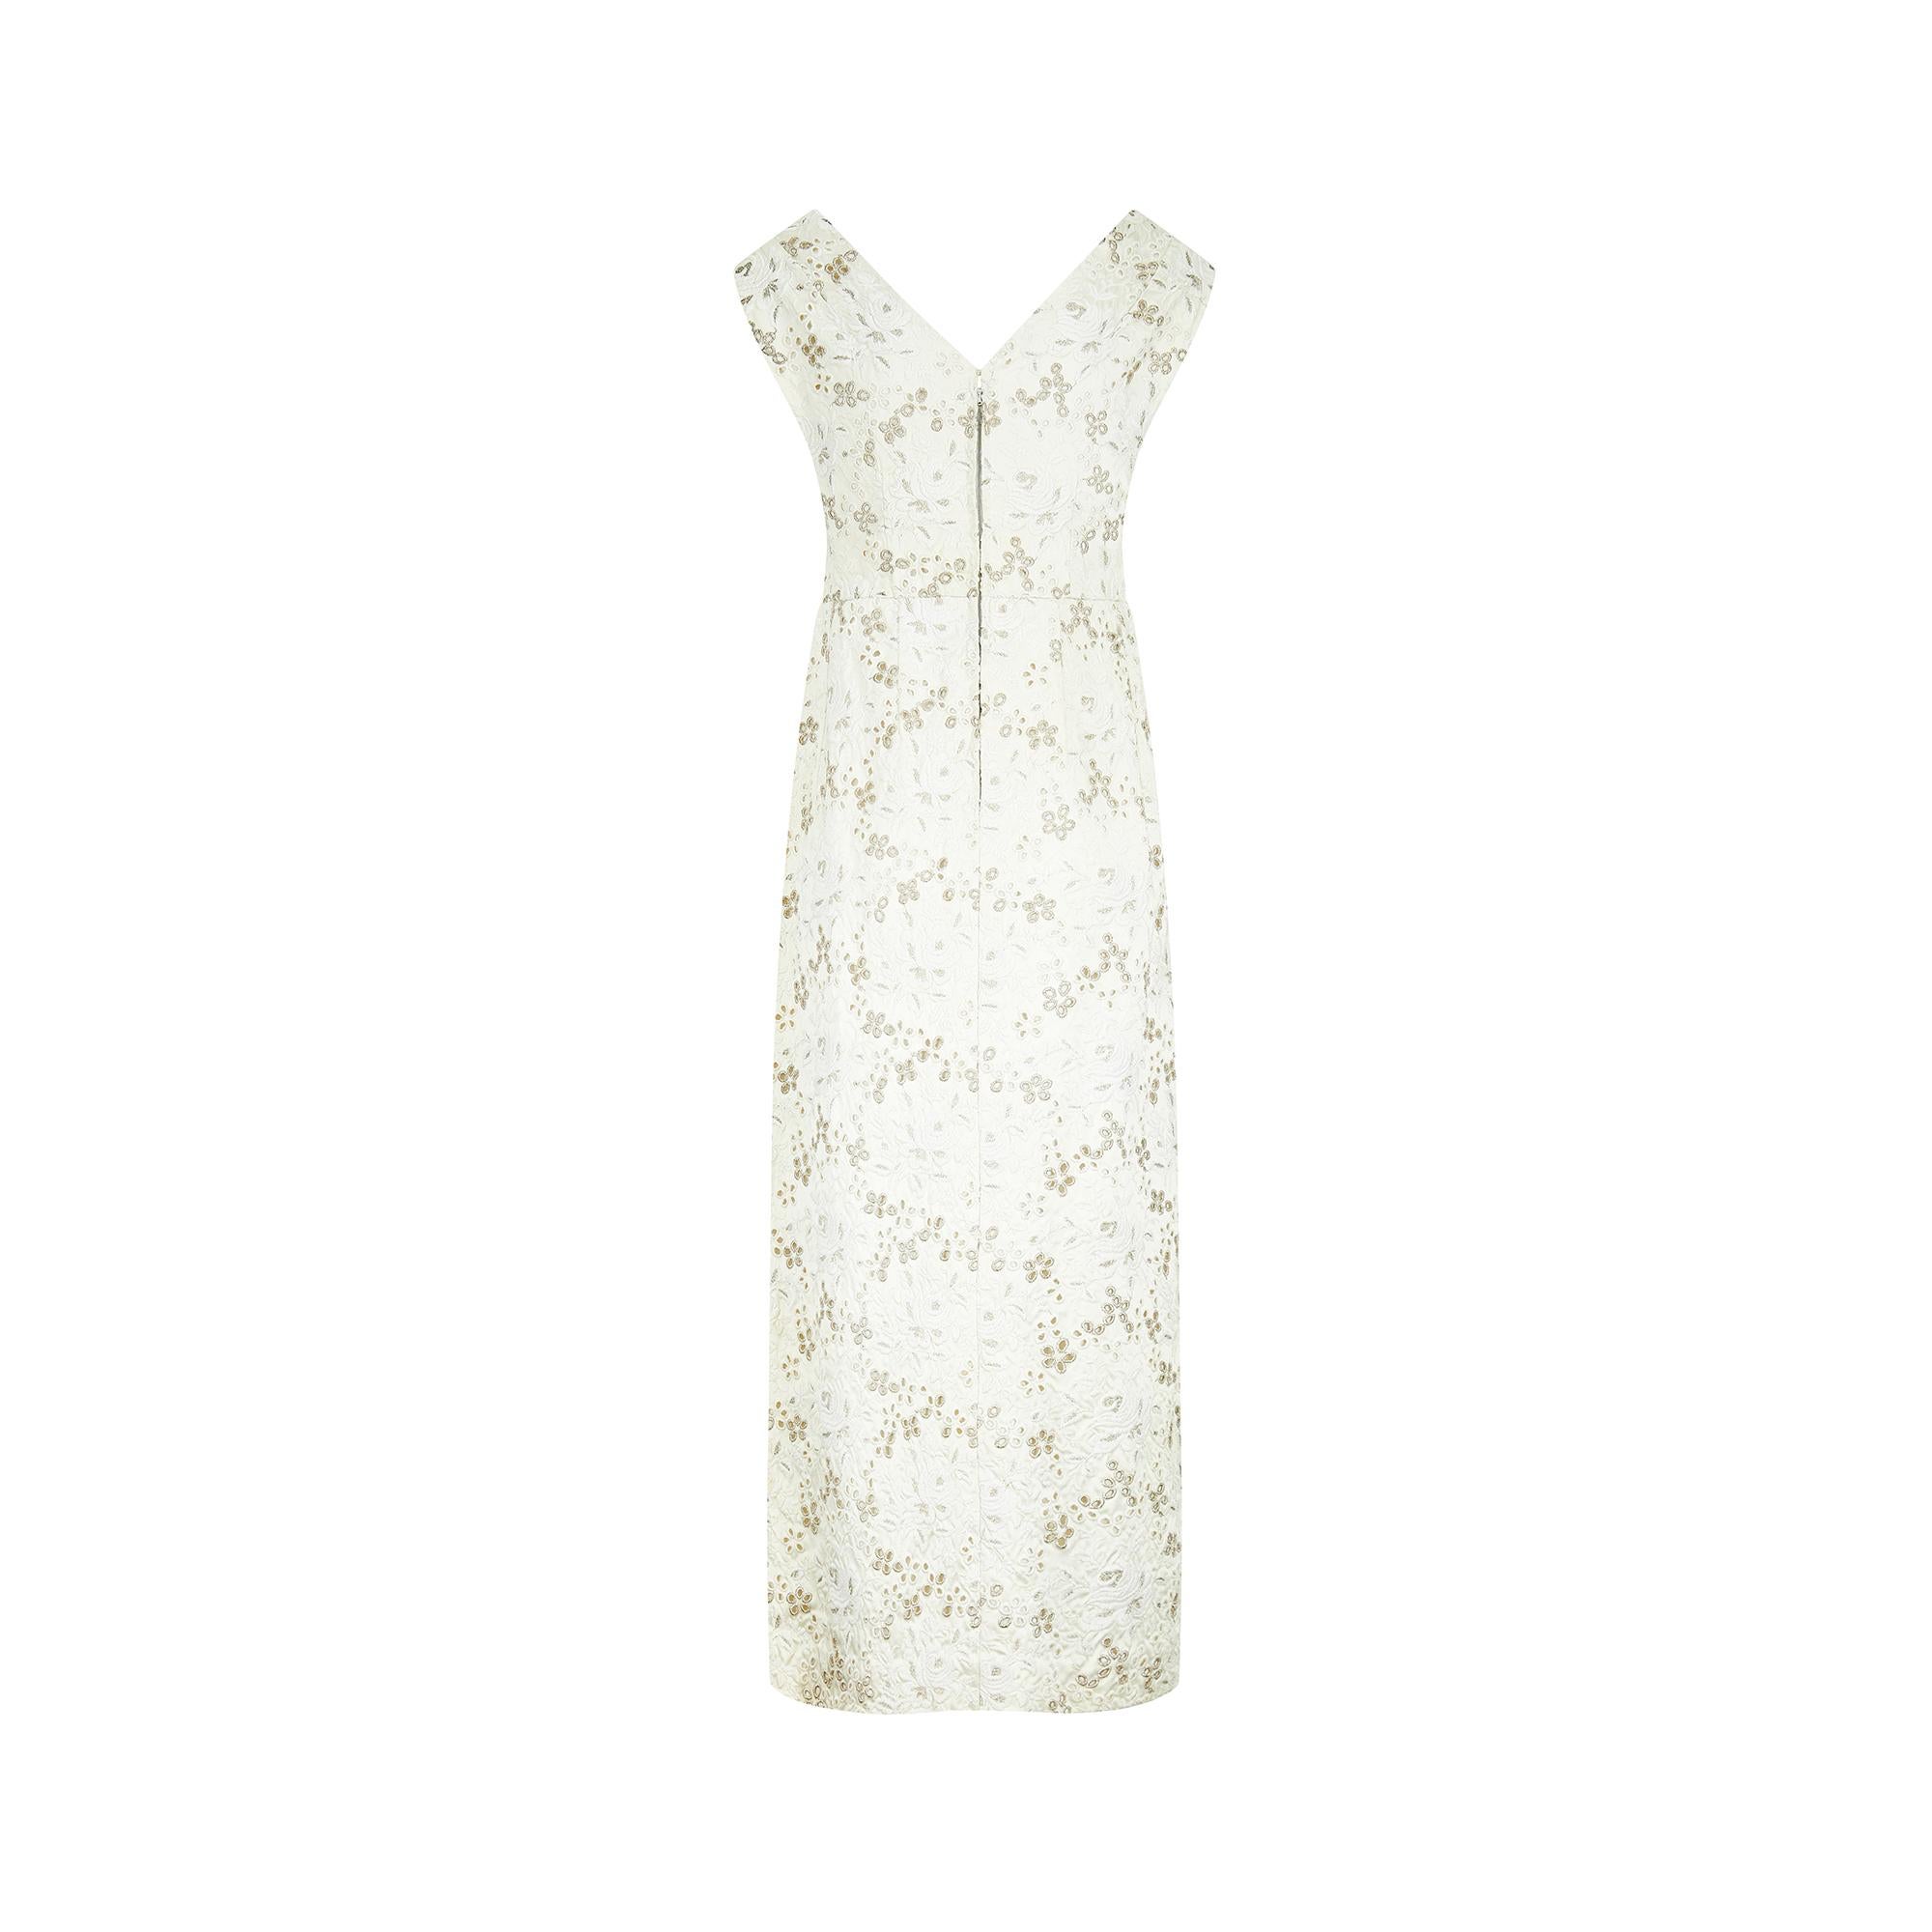 1960s White Floral Embroidered Brocade Column Dress In Excellent Condition For Sale In London, GB